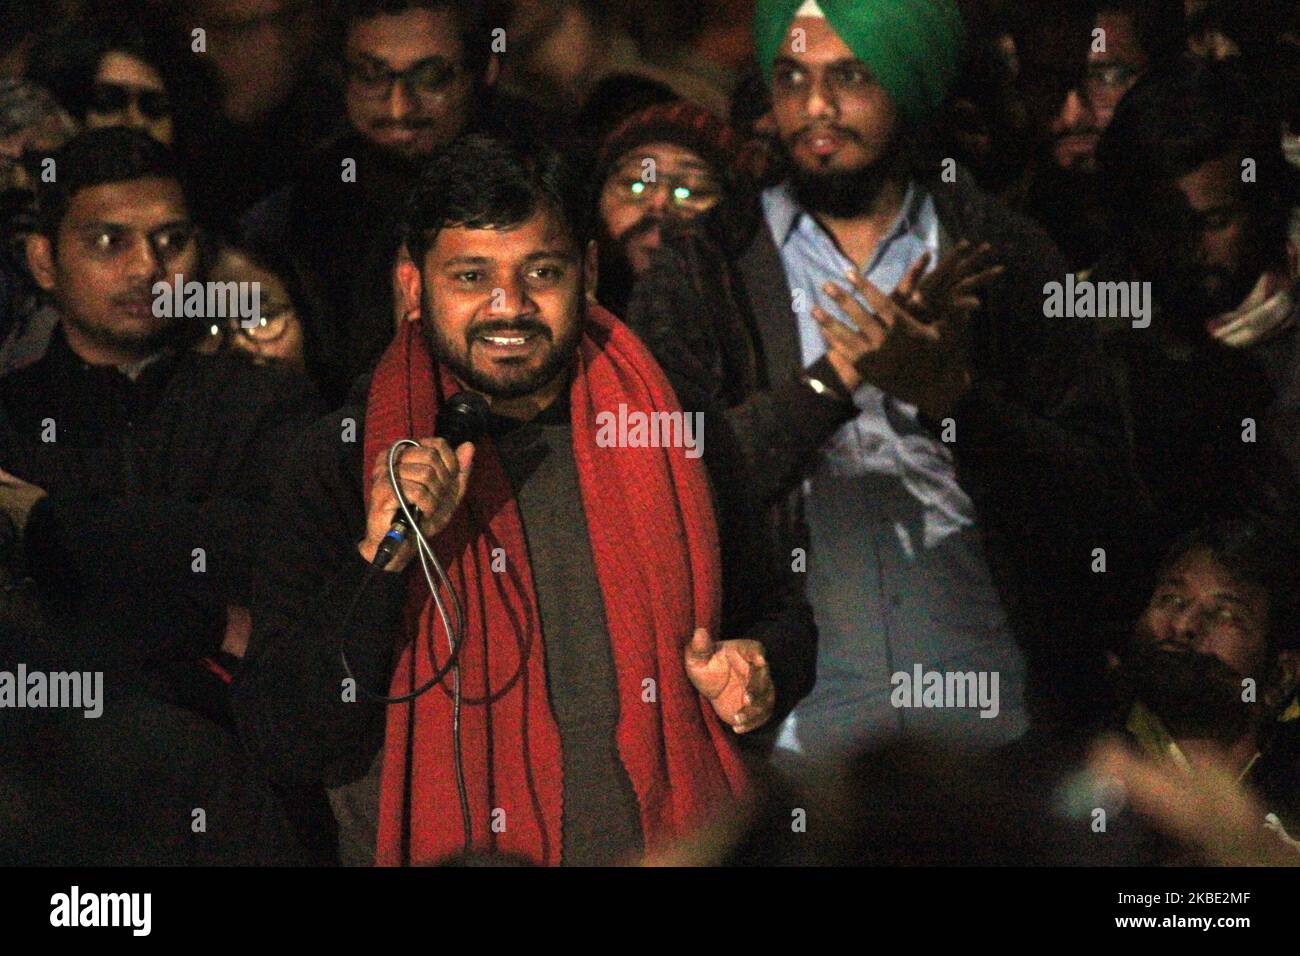 Former JNUSU president Kanhaiya Kumar addresses the gathering, outside Sabarmati Hostel on January 7, 2020 in New Delhi, India. A group of masked goons barged into the university on Sunday and attacked several students and teachers, went on a rampage, injuring 34 people. (Photo by Mayank Makhija/NurPhoto) Stock Photo